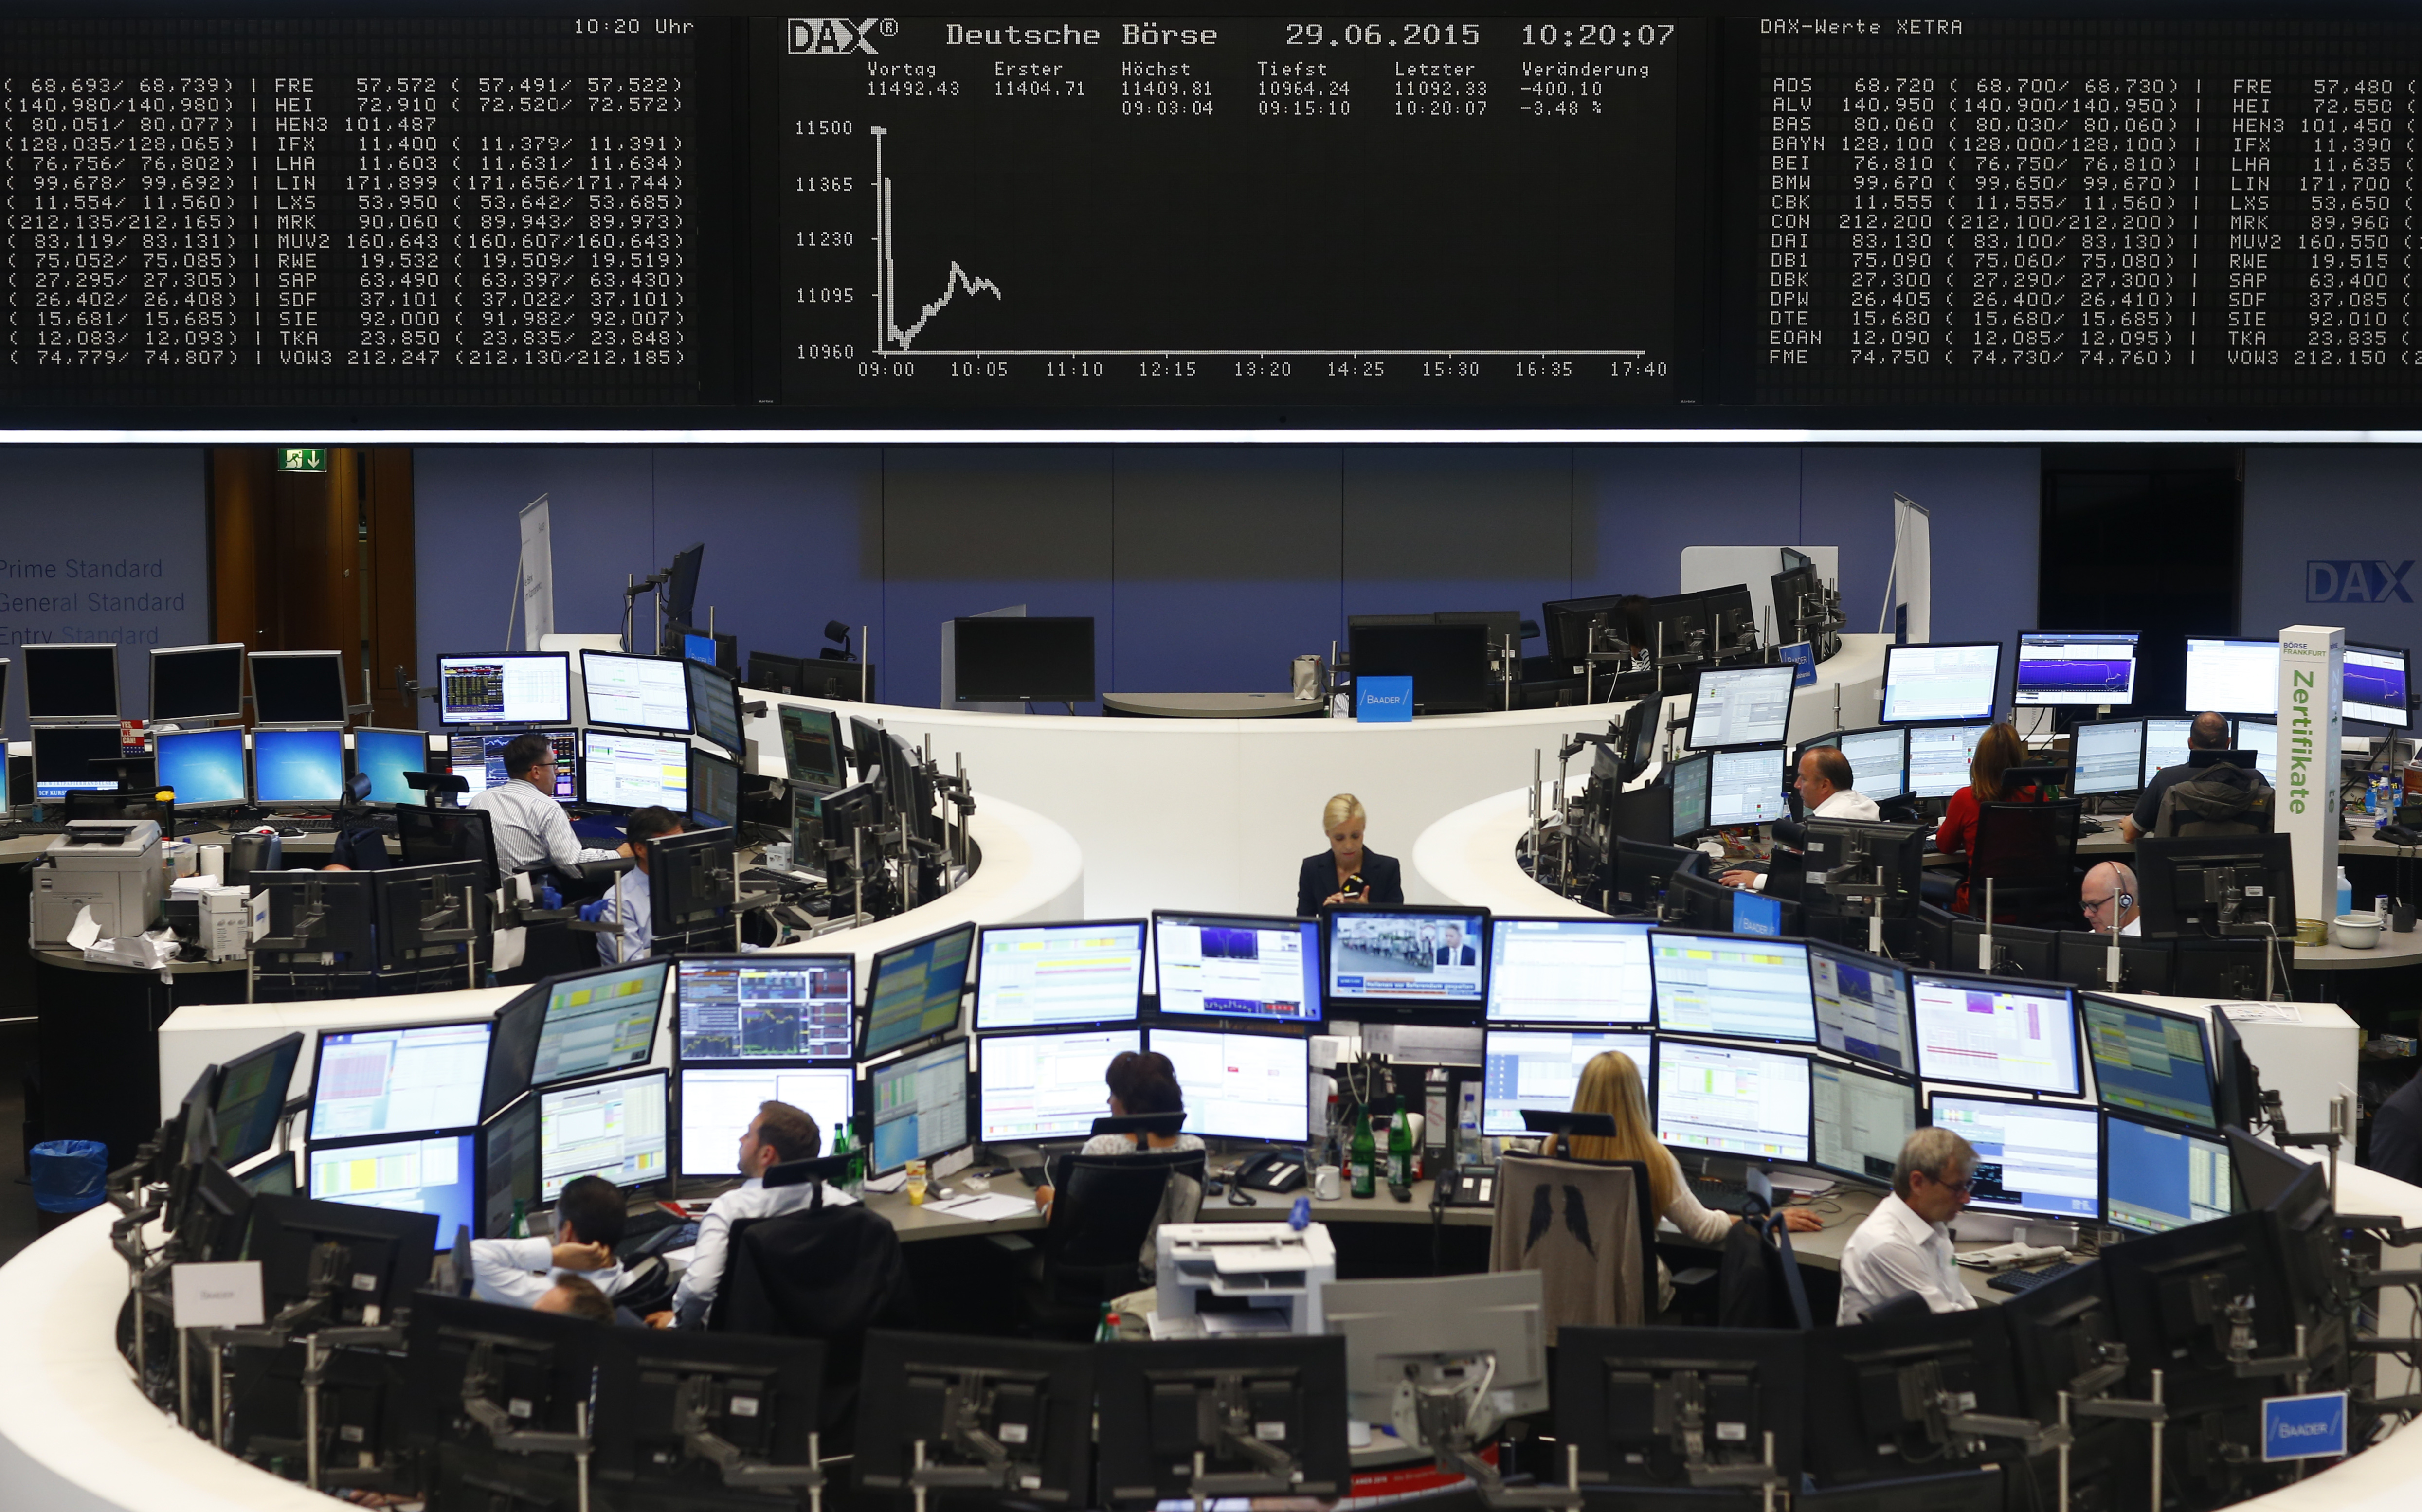 Traders sit at their desks in front of the DAX board at the Frankfurt stock exchange